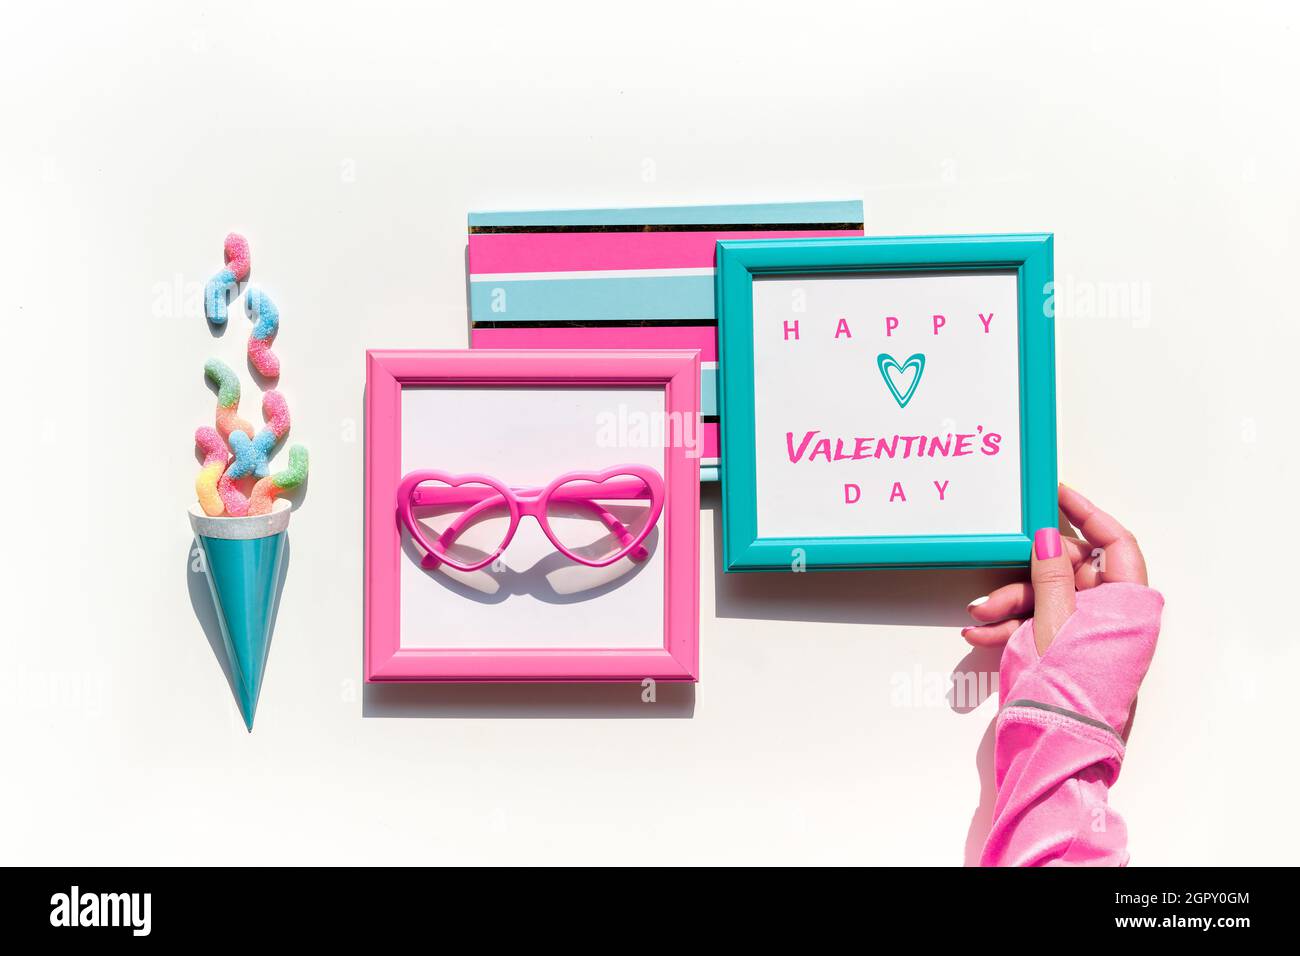 Happy Valentines day. Collection of vibrant objects and sweets in pink and mint green.Top view, flat lay. Chocolate, candy. Notebook, frame in hand. F Stock Photo